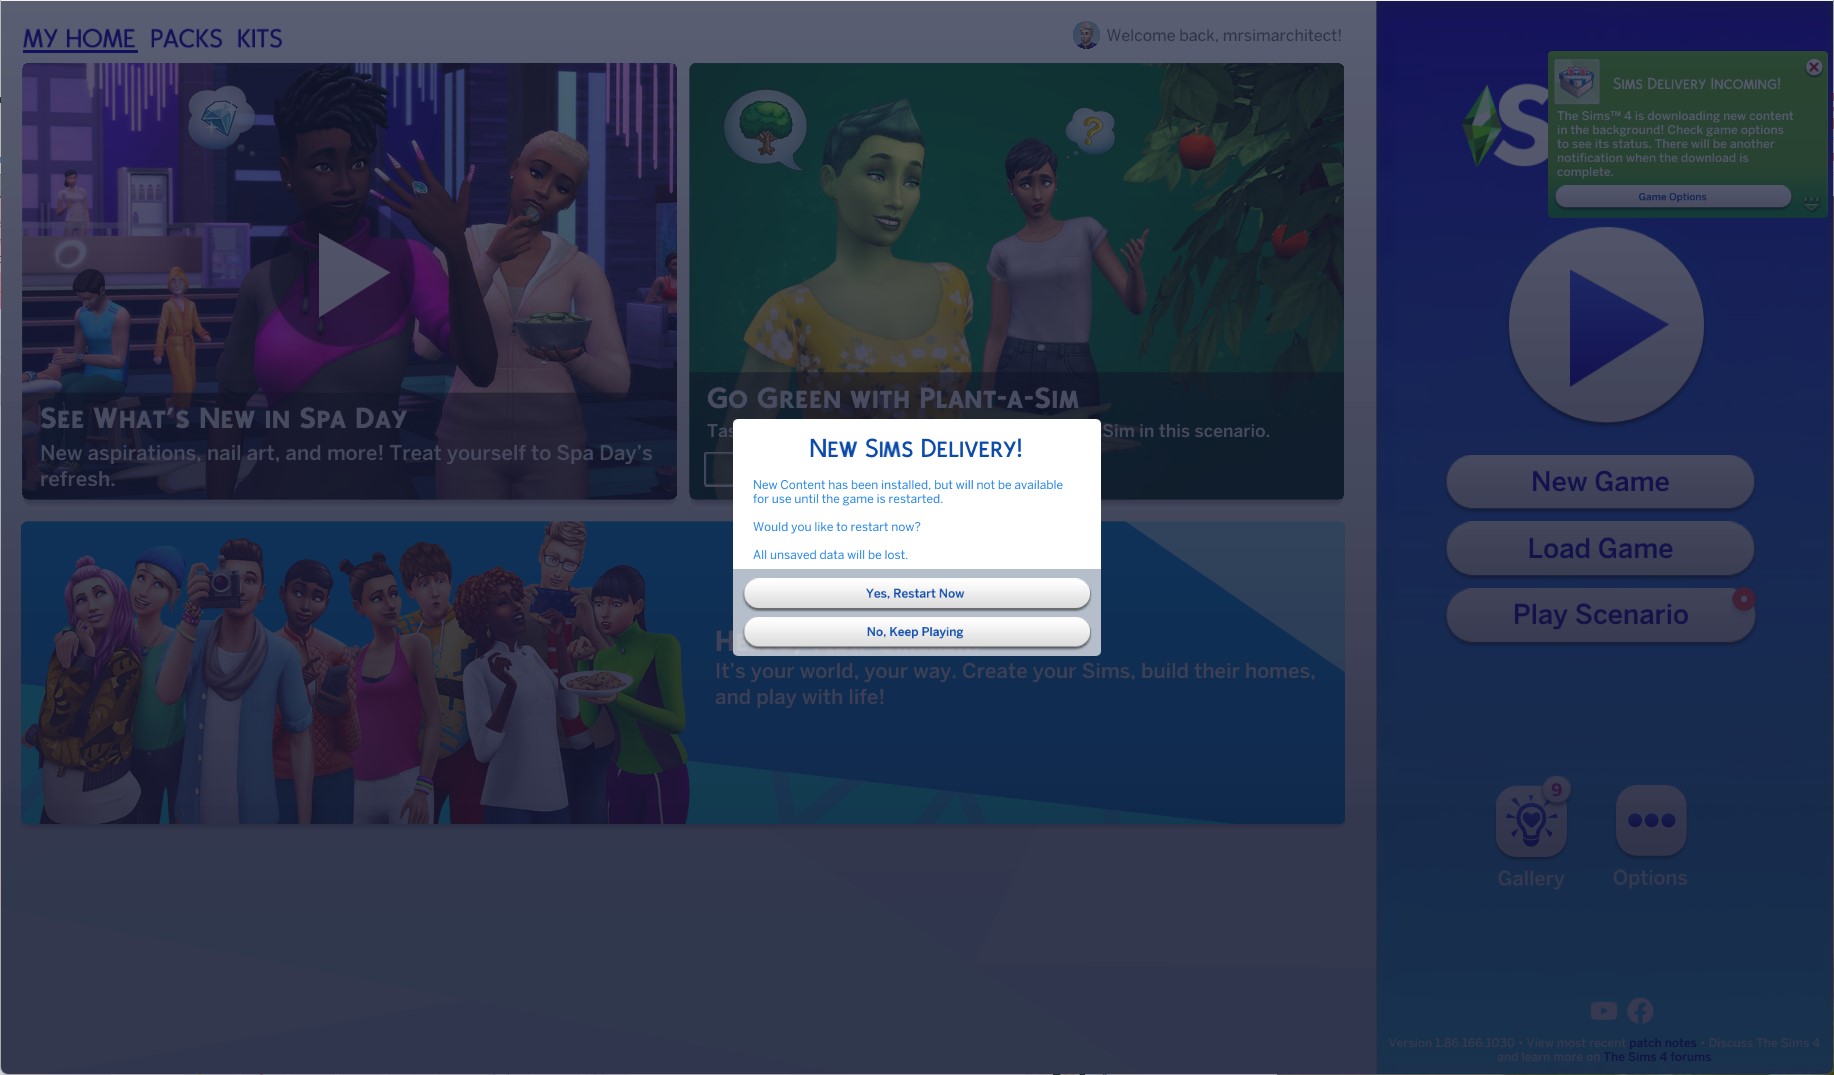 The Sims 4 Delivery Express 7.0.2 - June 8, 2022 - The Sim Architect